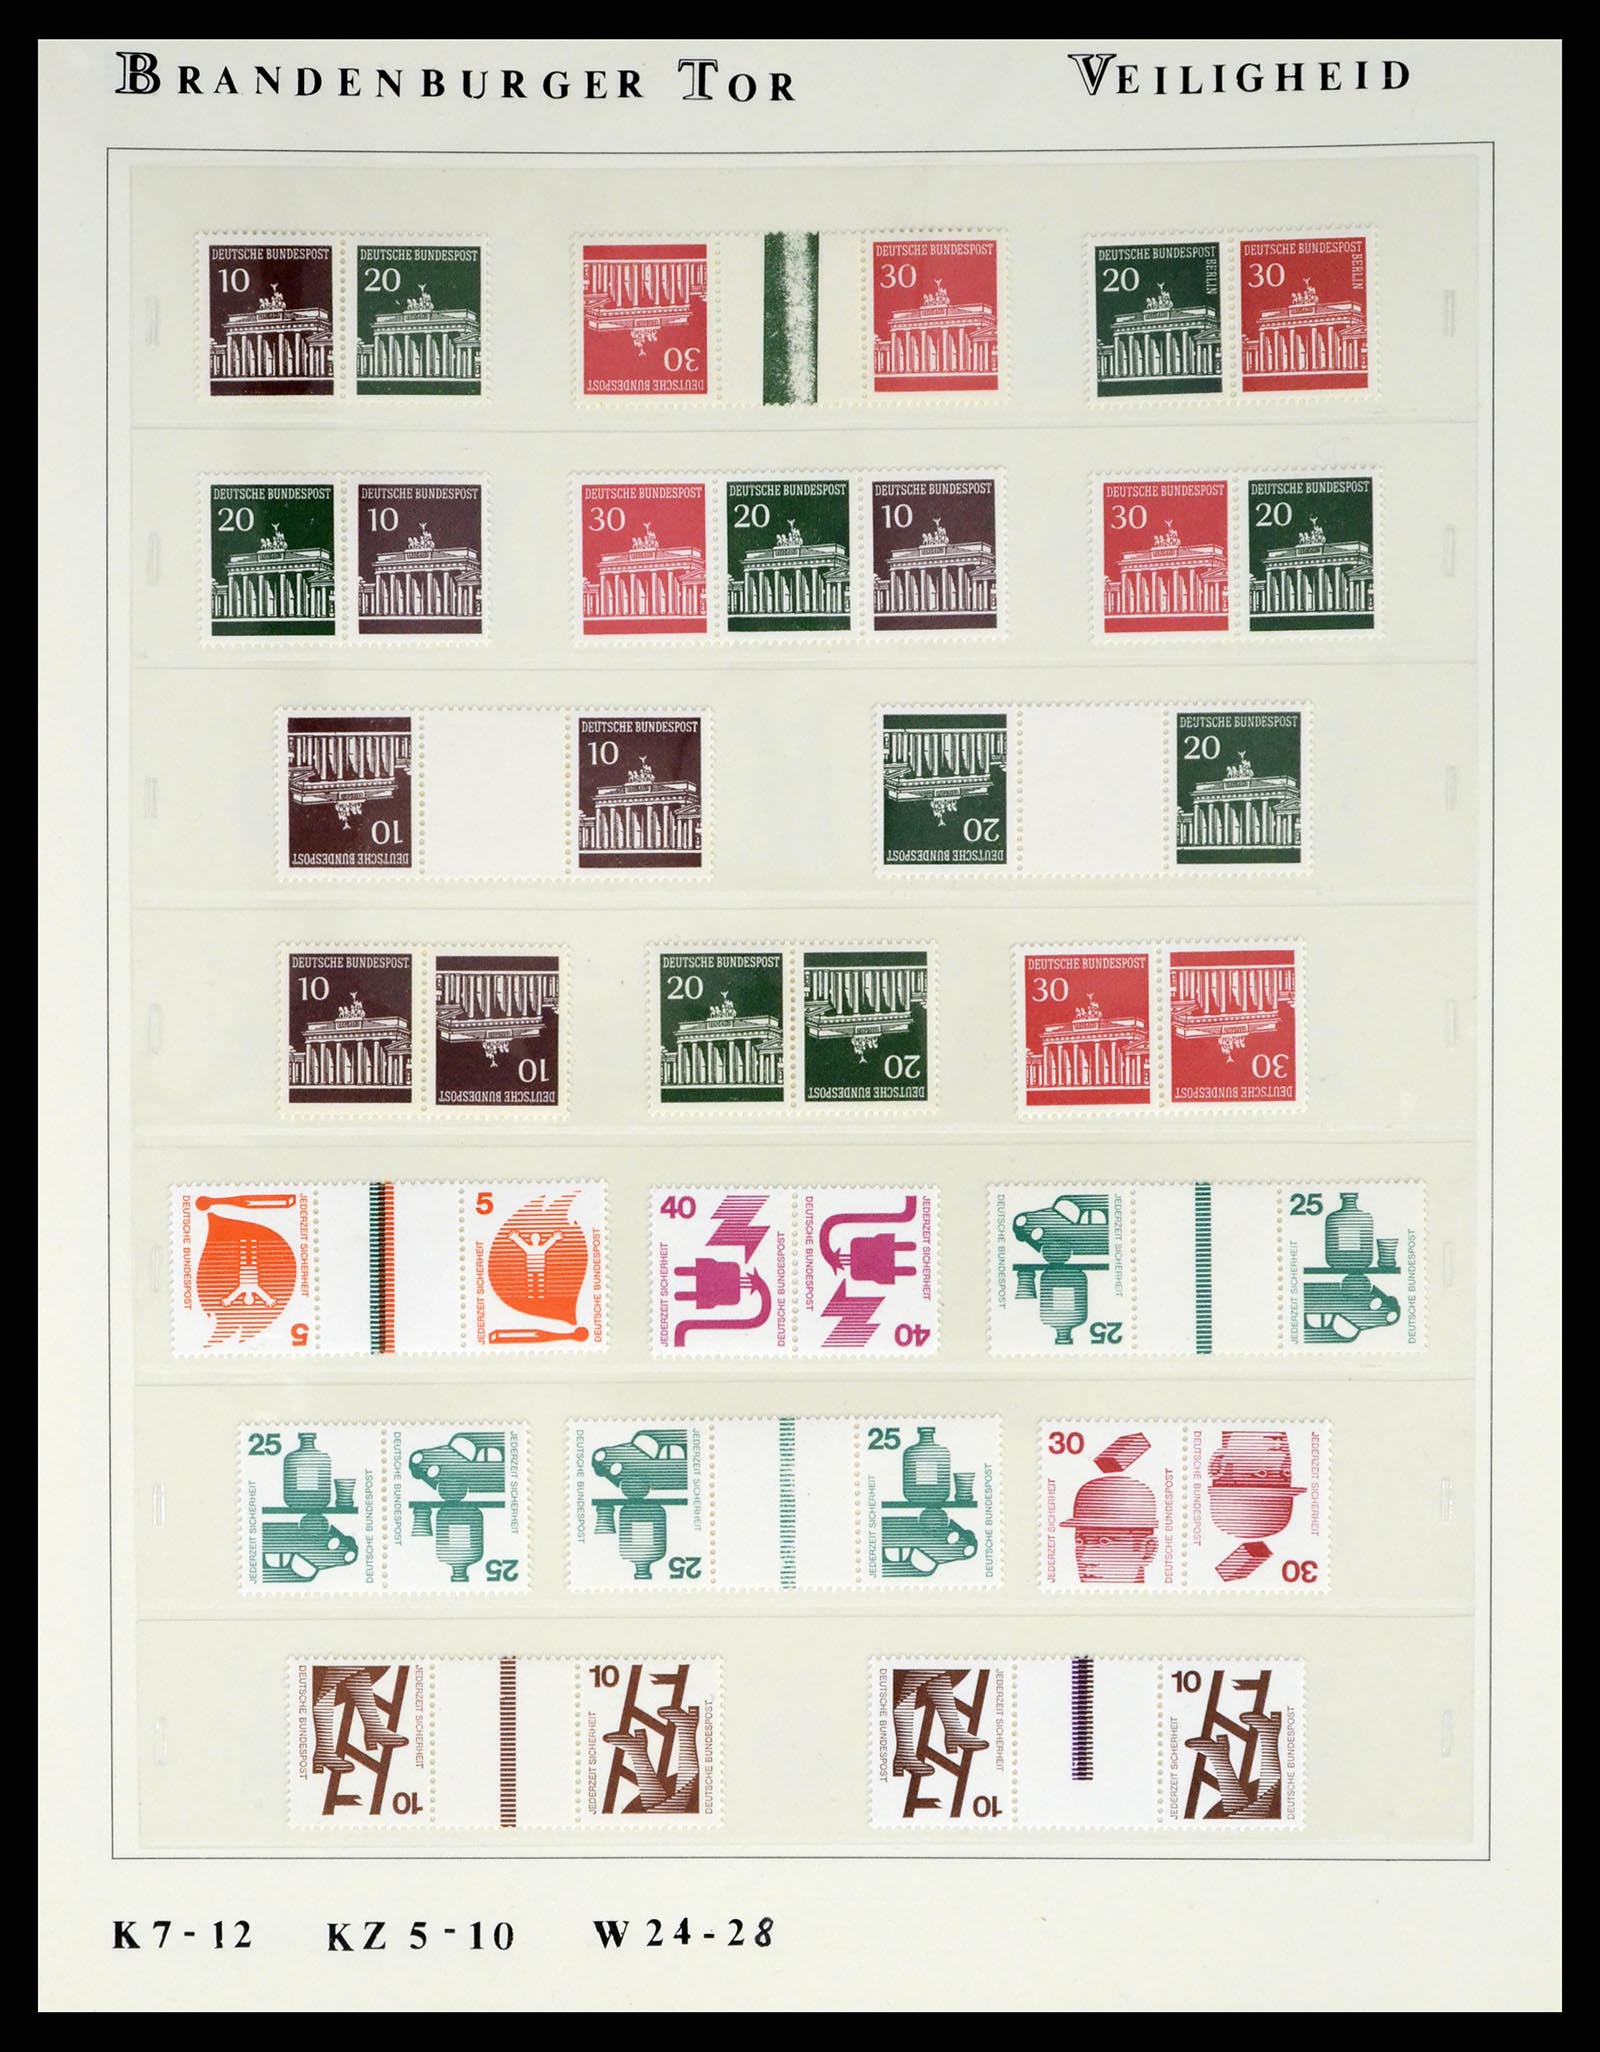 37354 033 - Stamp collection 37354 Bundespost and Berlin 1955-2000.